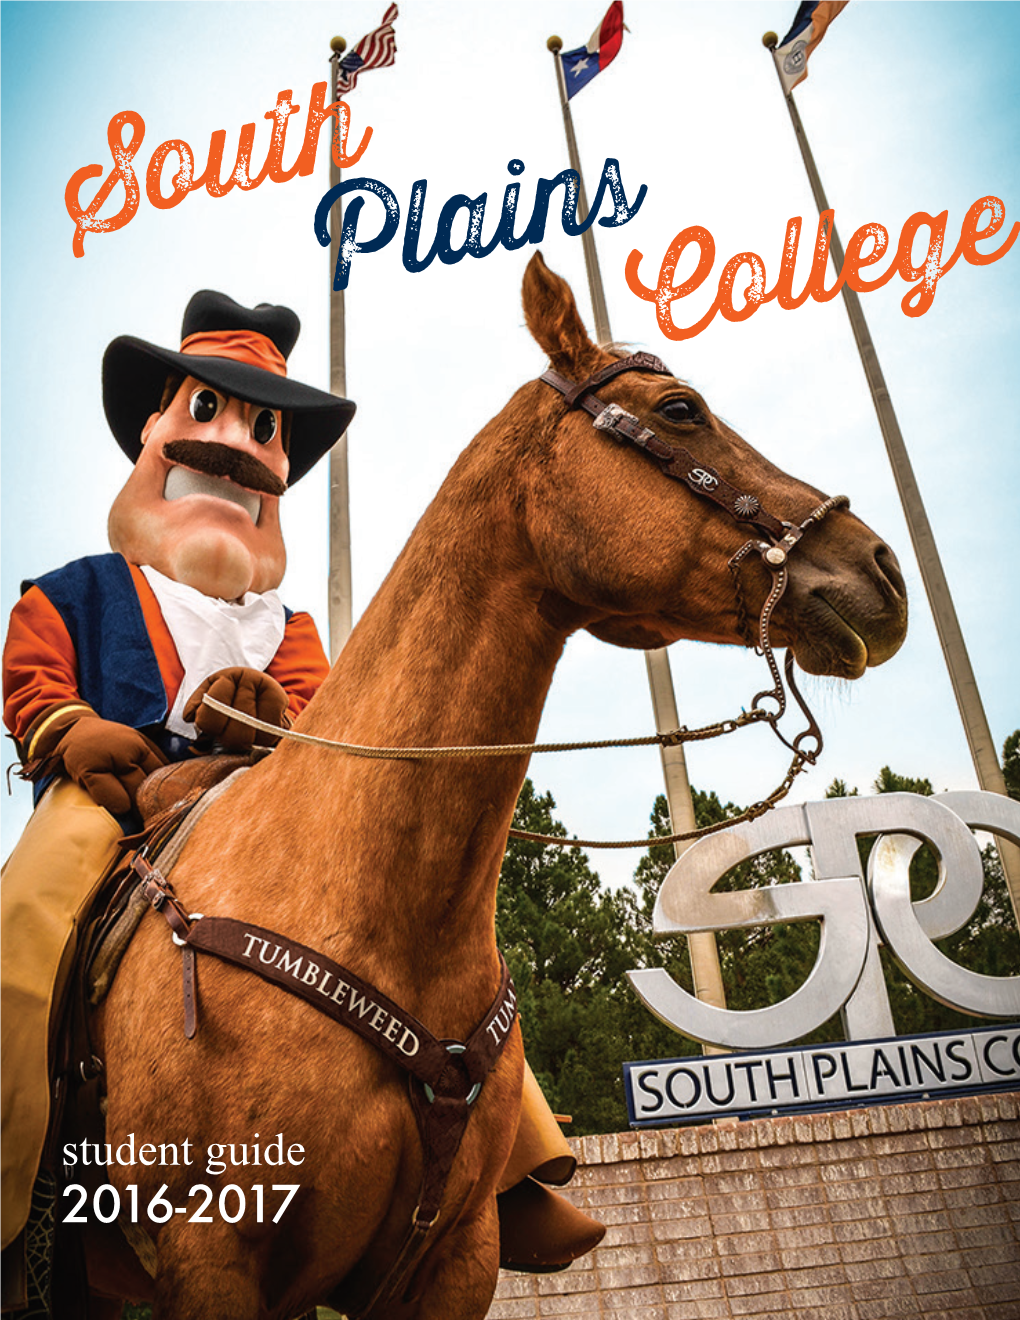 Student Guide 2016-2017 WELCOME to SOUTH PLAINS COLLEGE